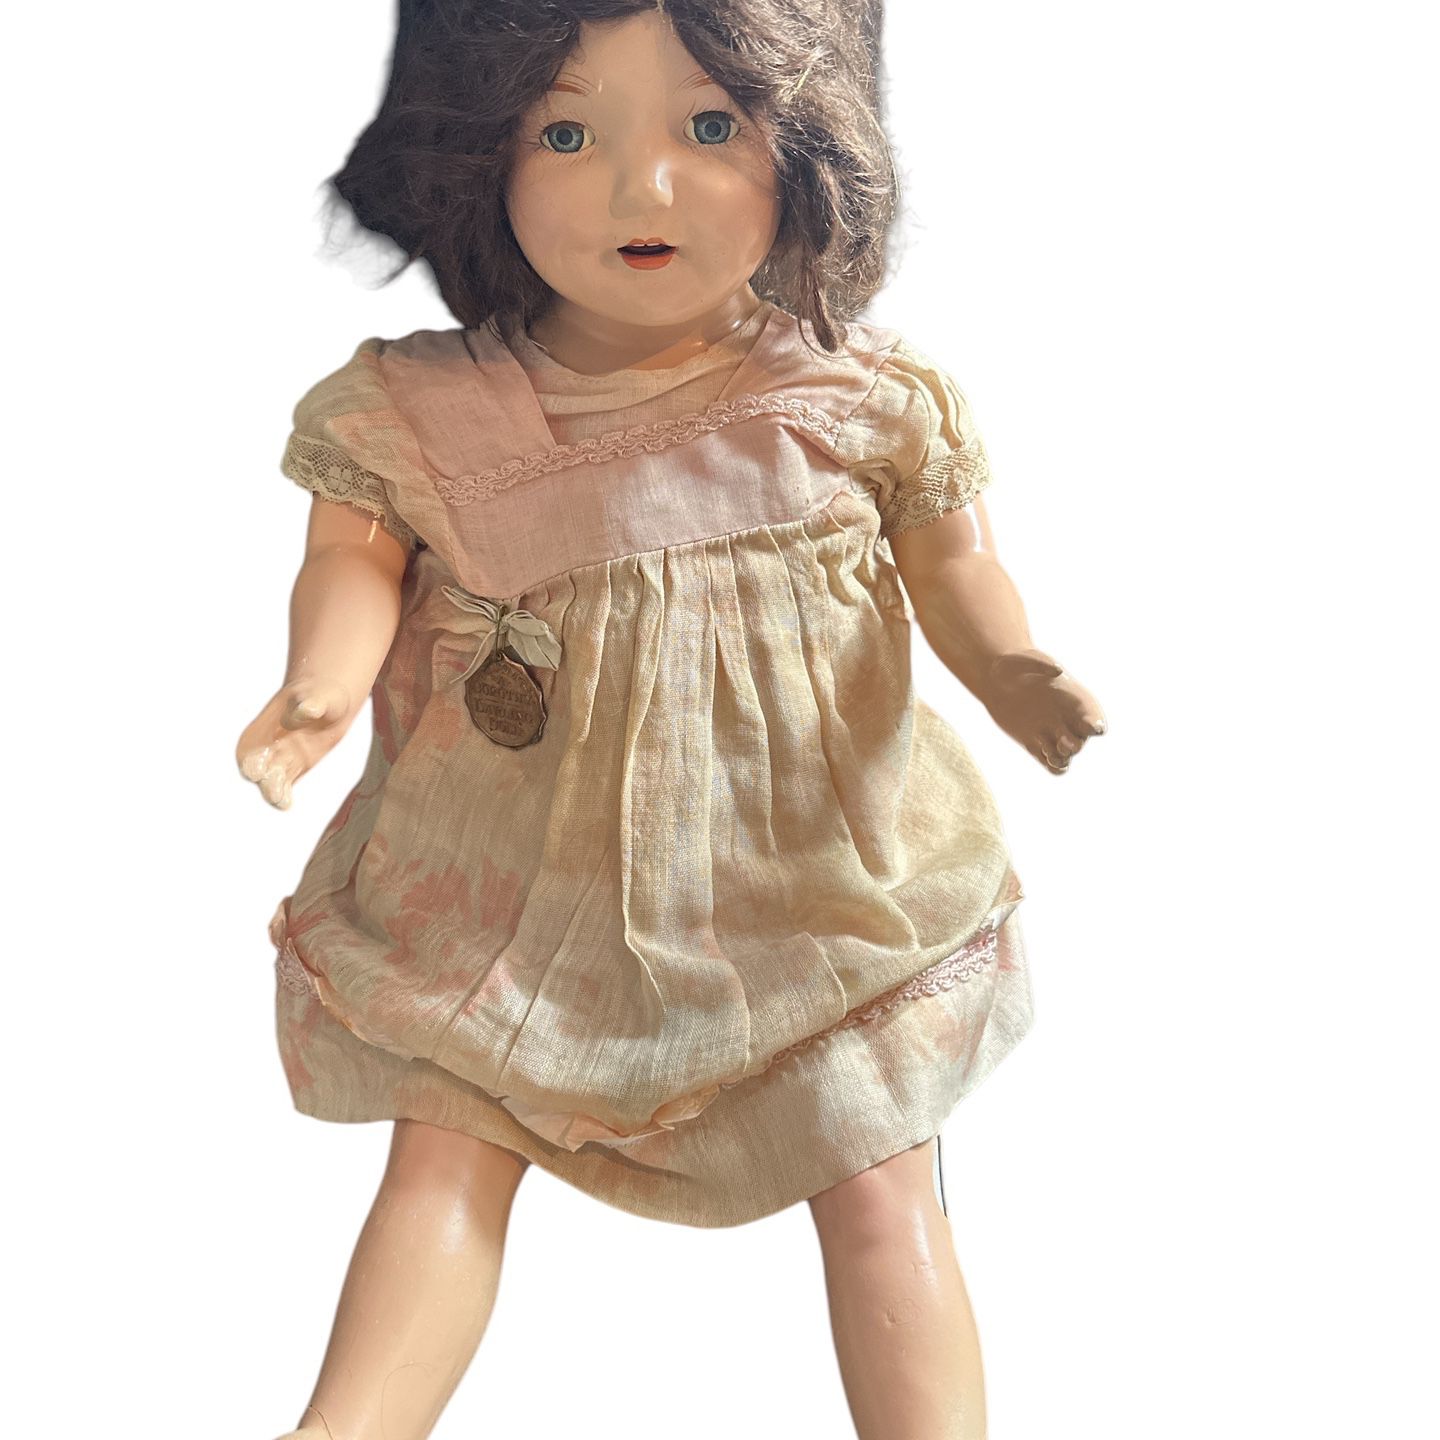 22” 1930’s I am Dorothy Darling rare in this condition doll . Original pin and clothes there is some deterioration do to age 80 years old please look 